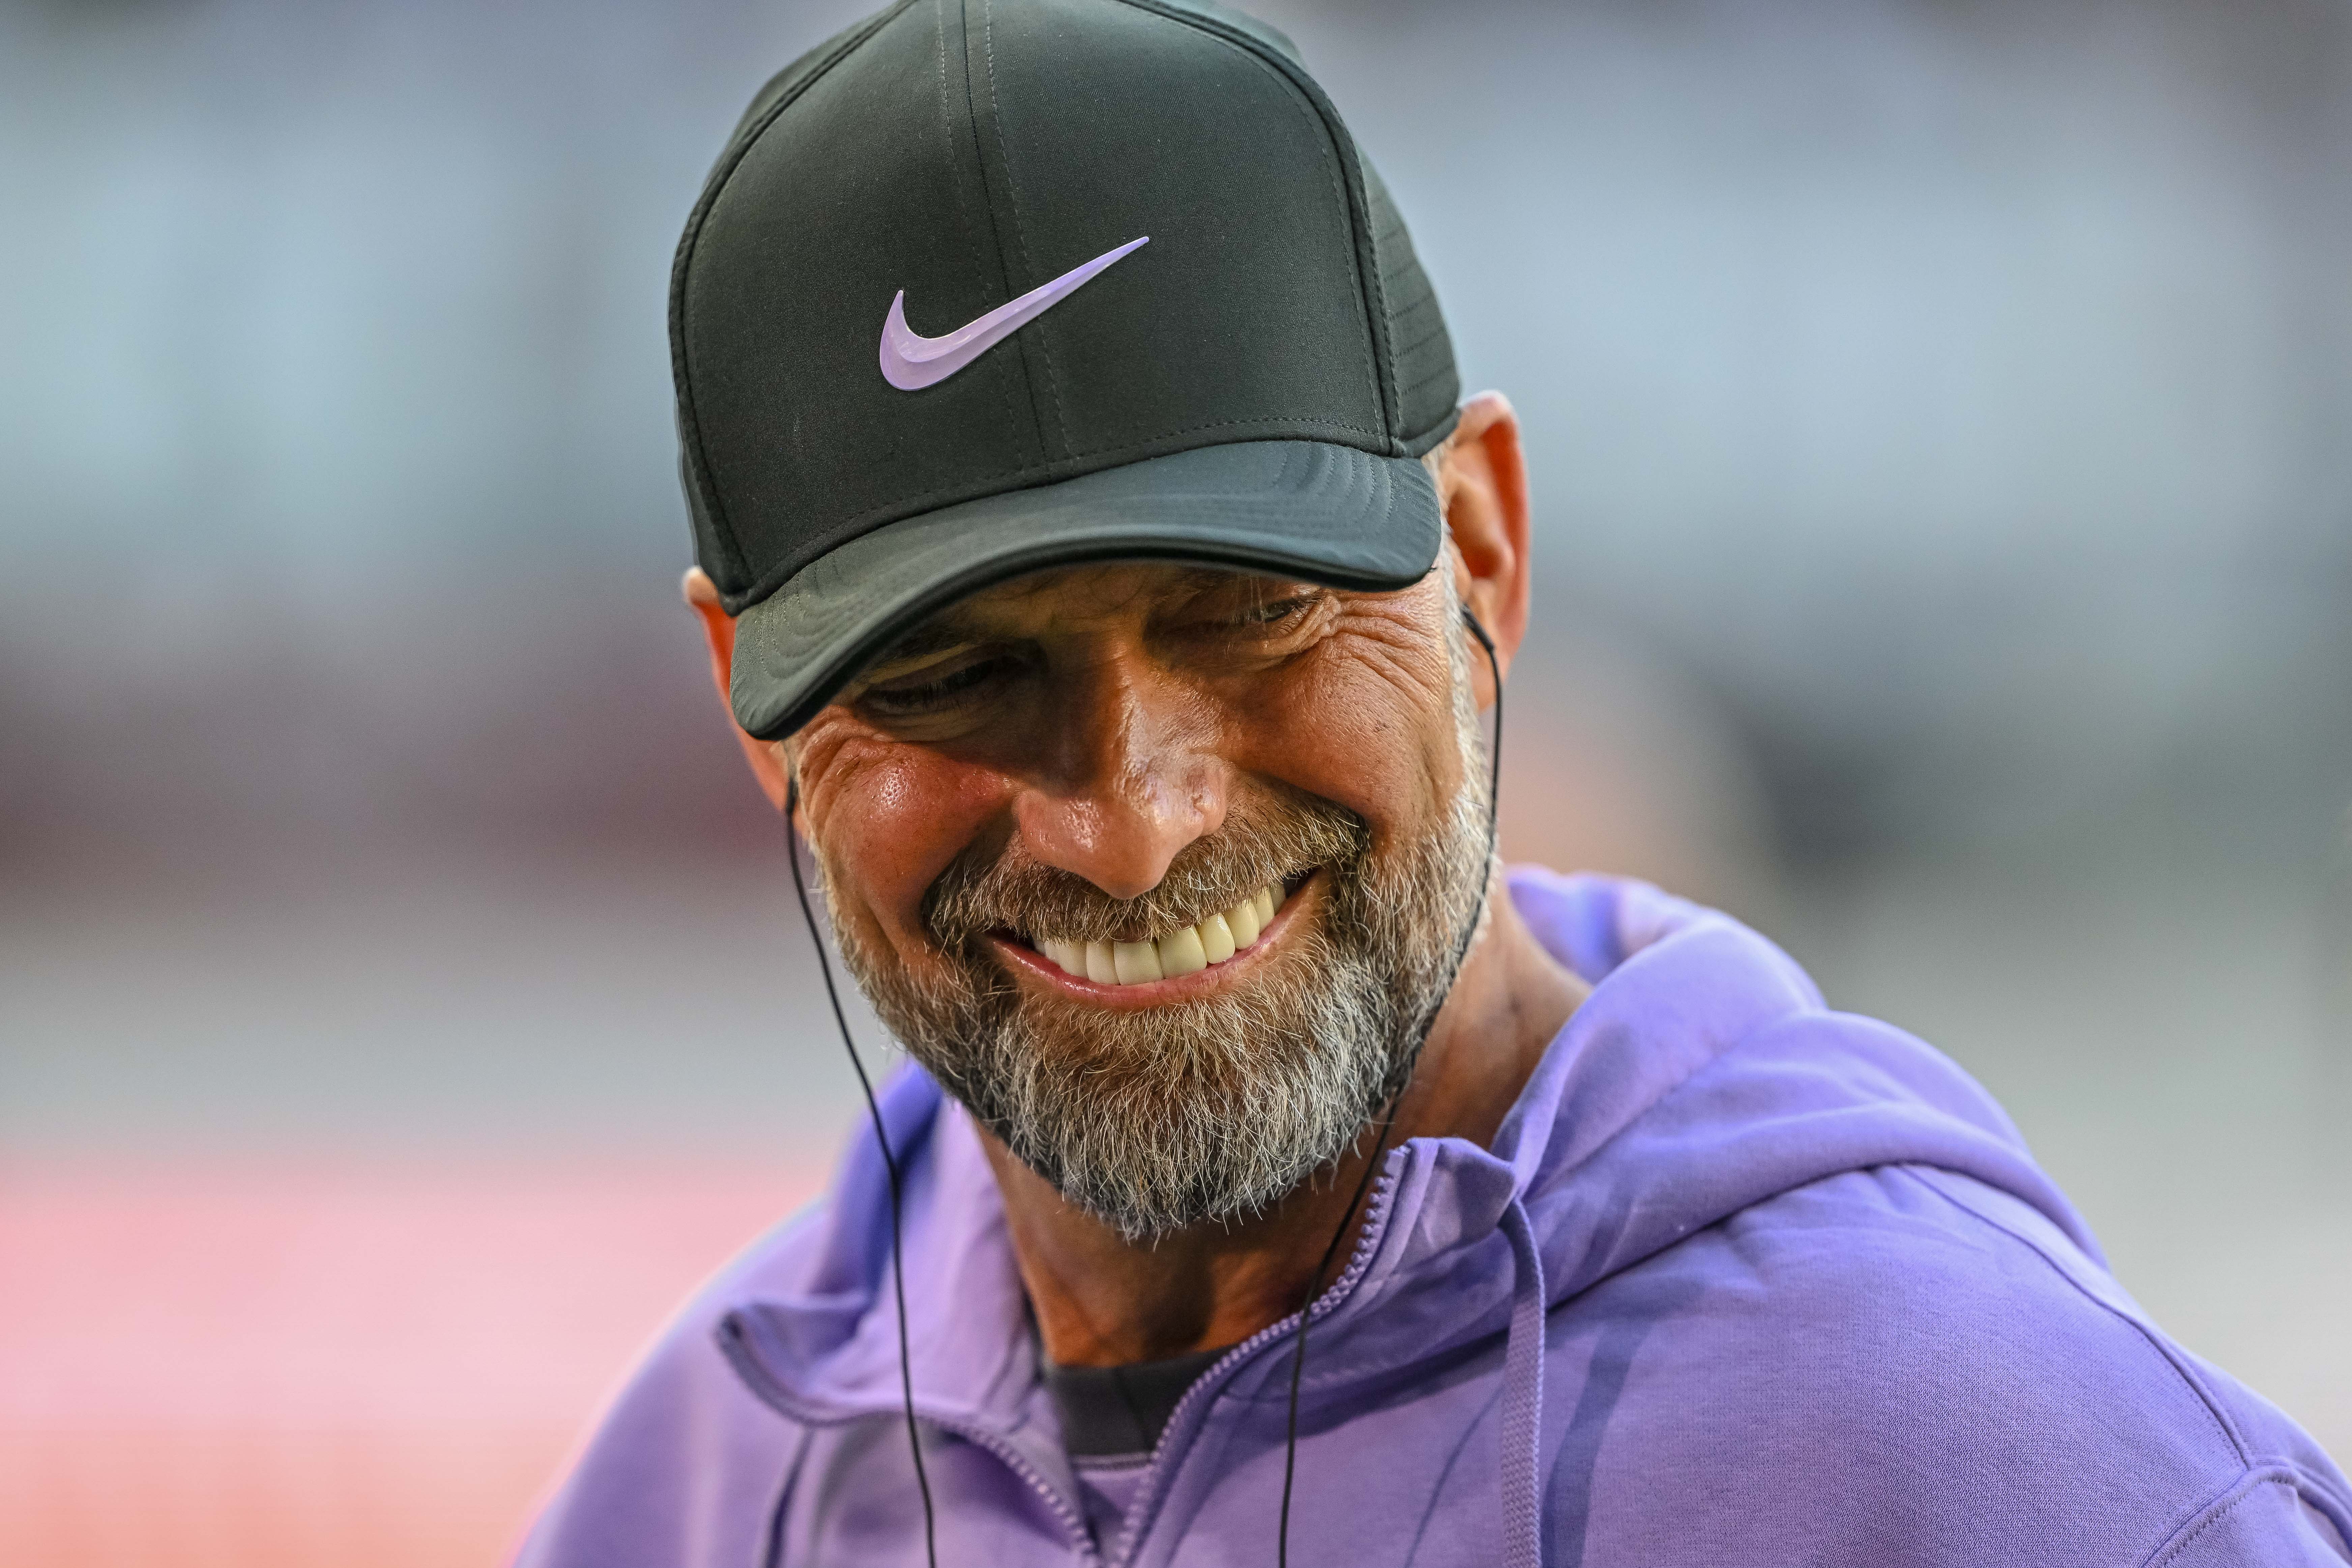 Manager Juergen Klopp of Liverpool FC smiles prior to the UEFA Europa League 2023/24 group stage match between LASK and Liverpool FC on September 21, 2023 in Linz, Austria.